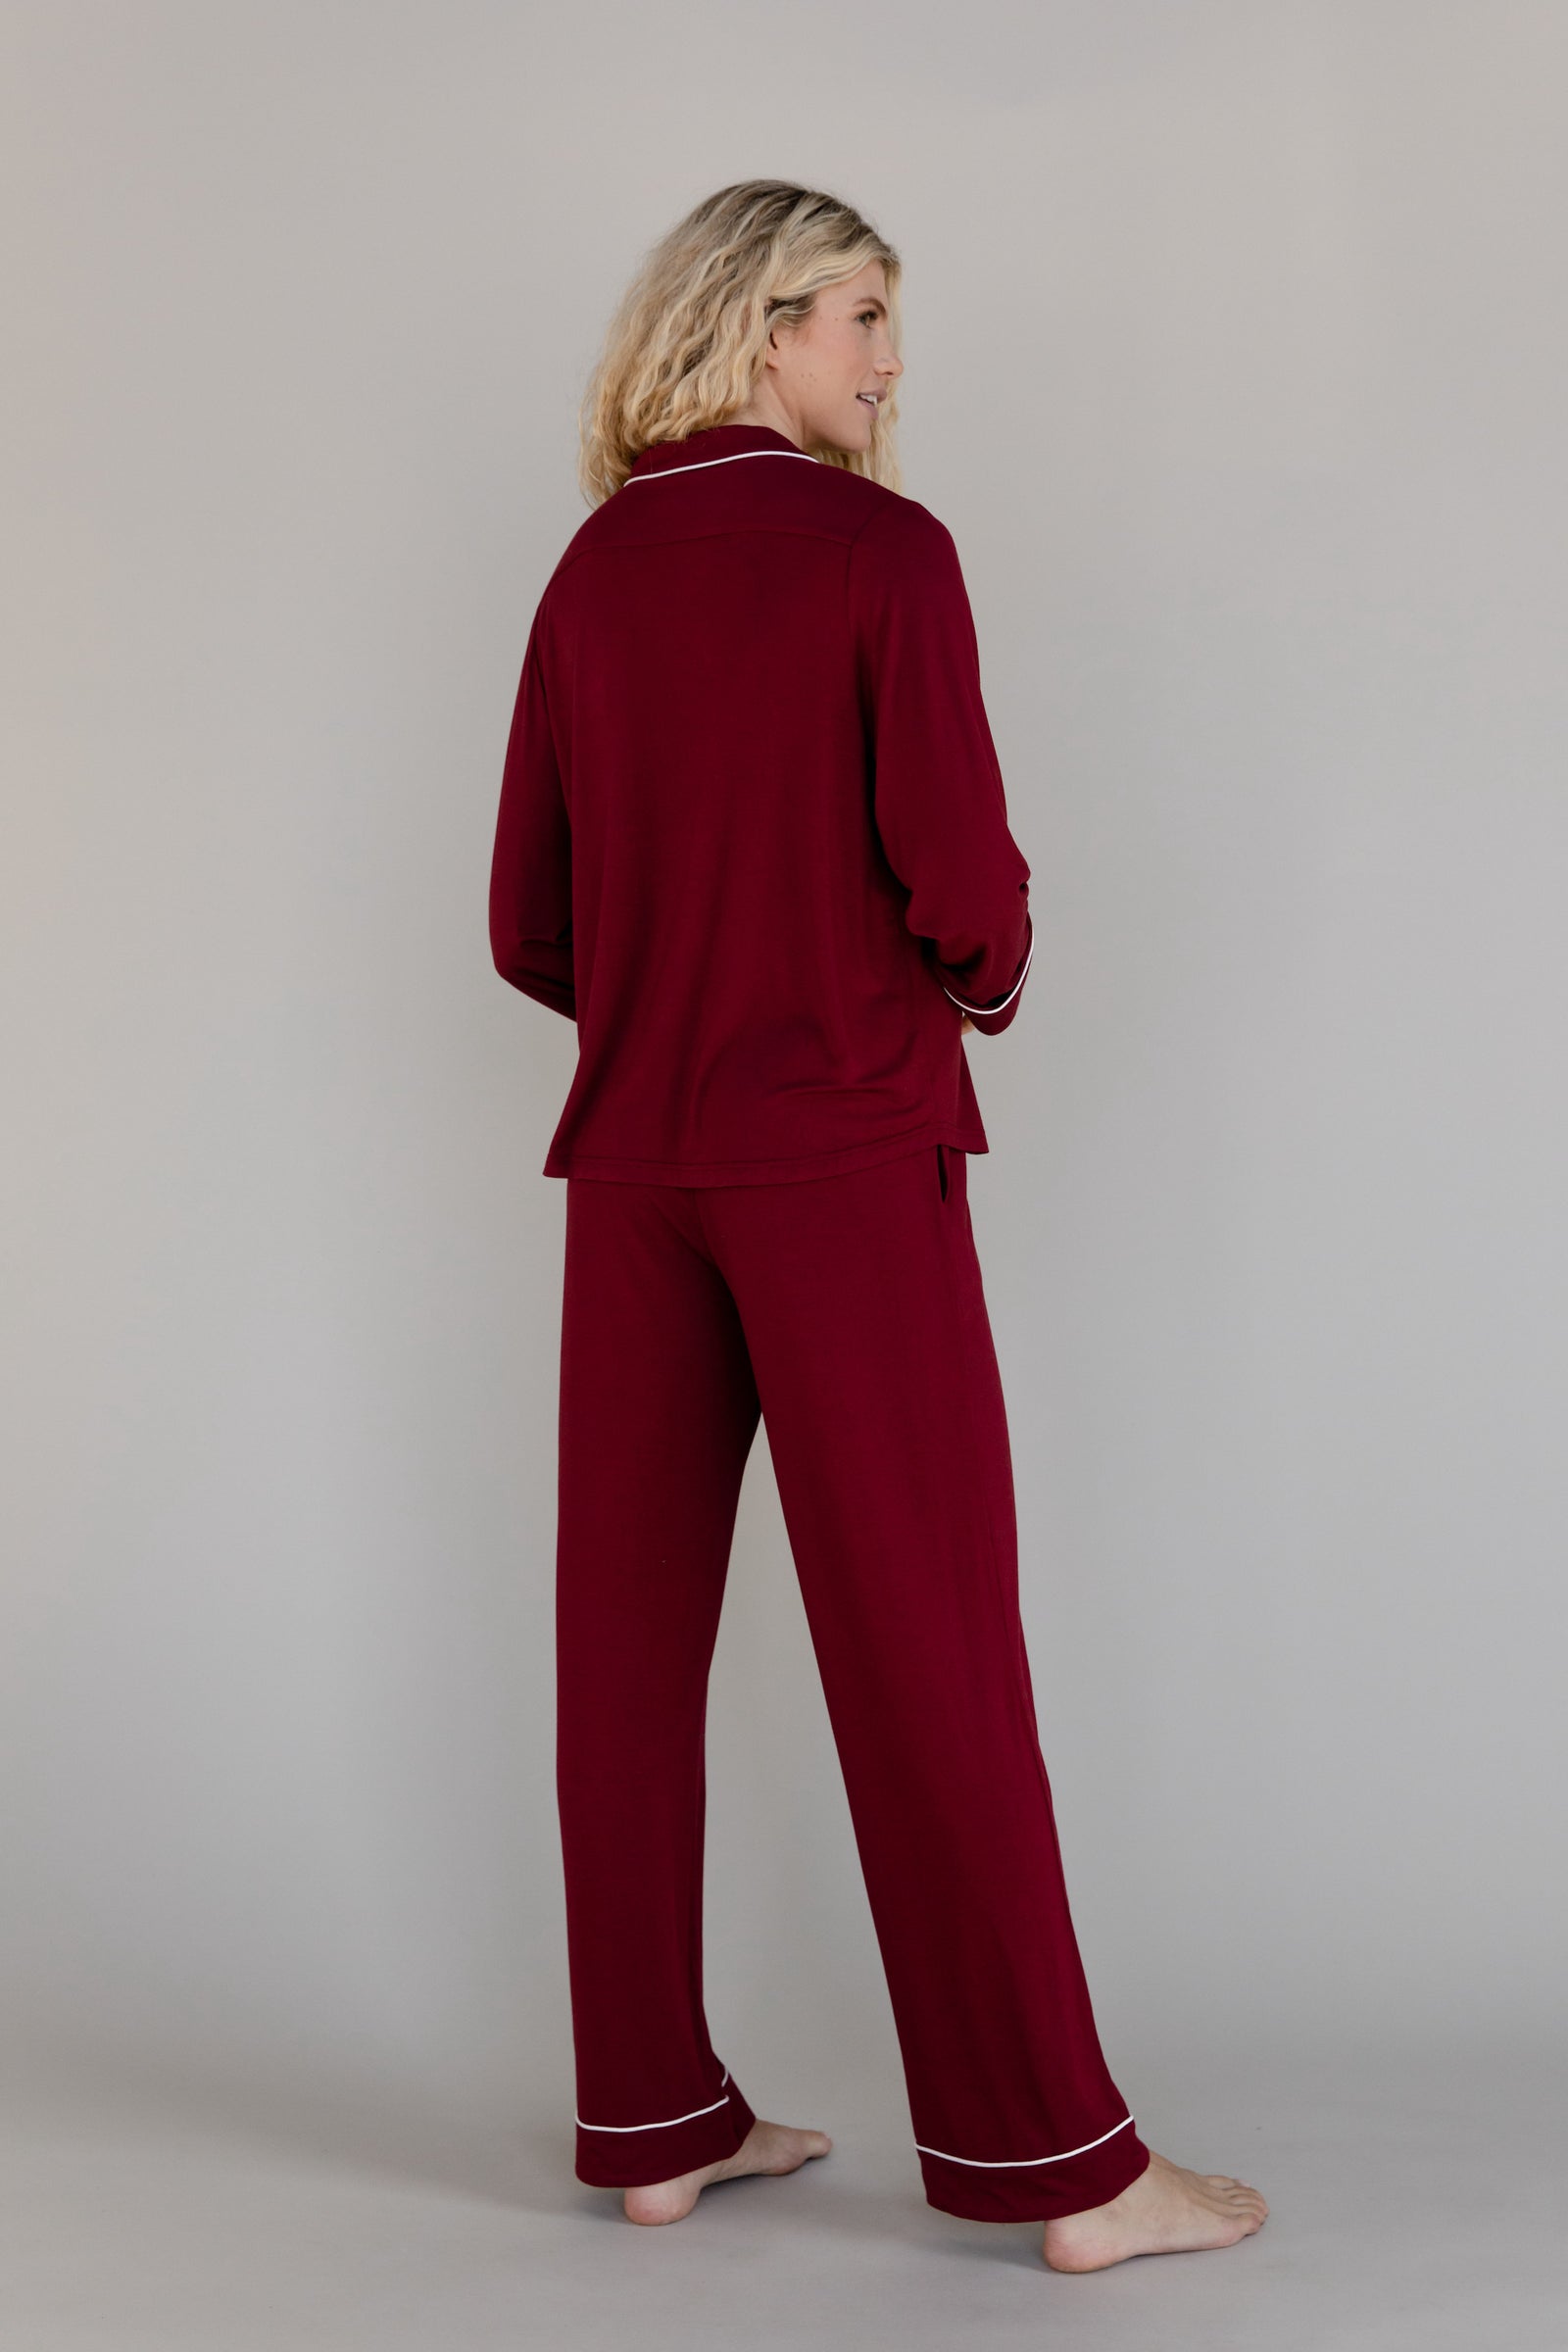 Pomegranate Long Sleeve Pajama Set modeled by a woman. The photo was taken in a high contrast setting, showing off the colors and lines of the pajamas. 